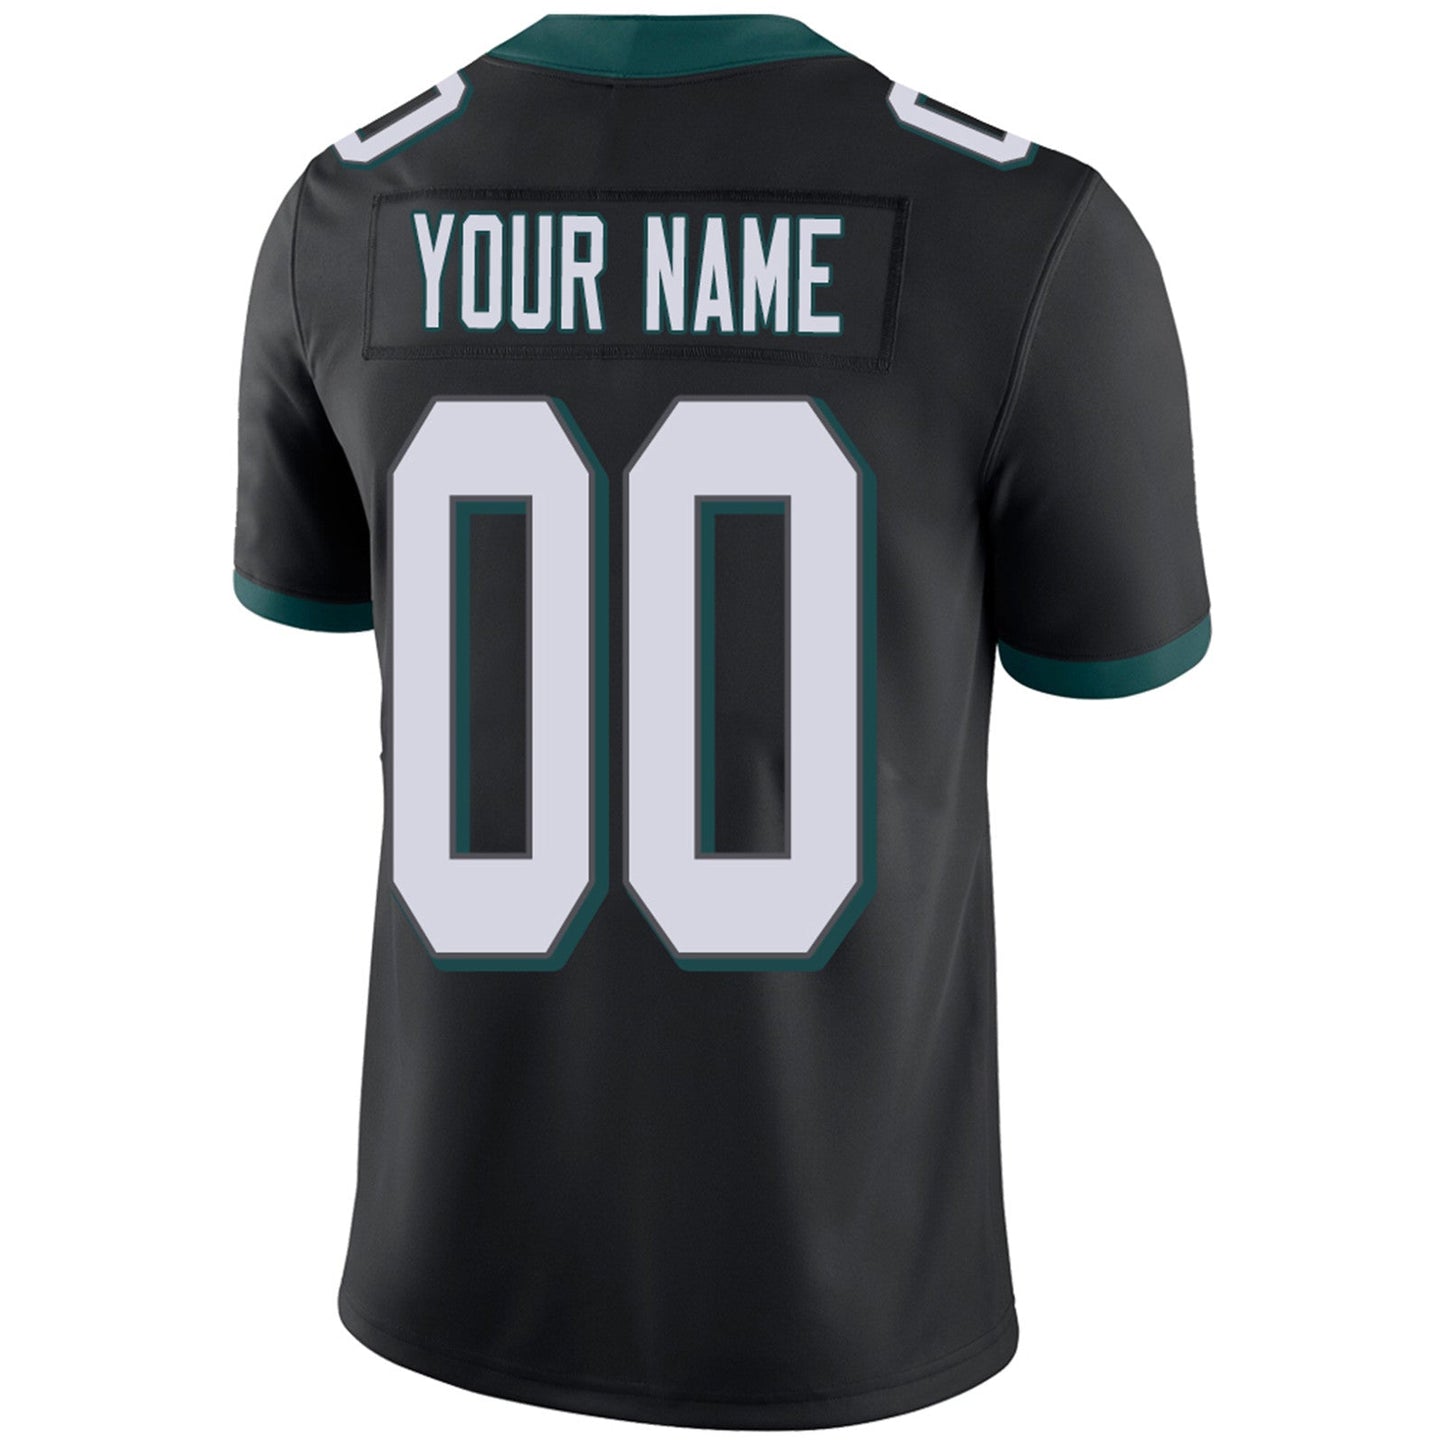 Custom P.Eagles Football Jerseys Team Player or Personalized Design Your Own Name for Men's Women's Youth Jerseys Green